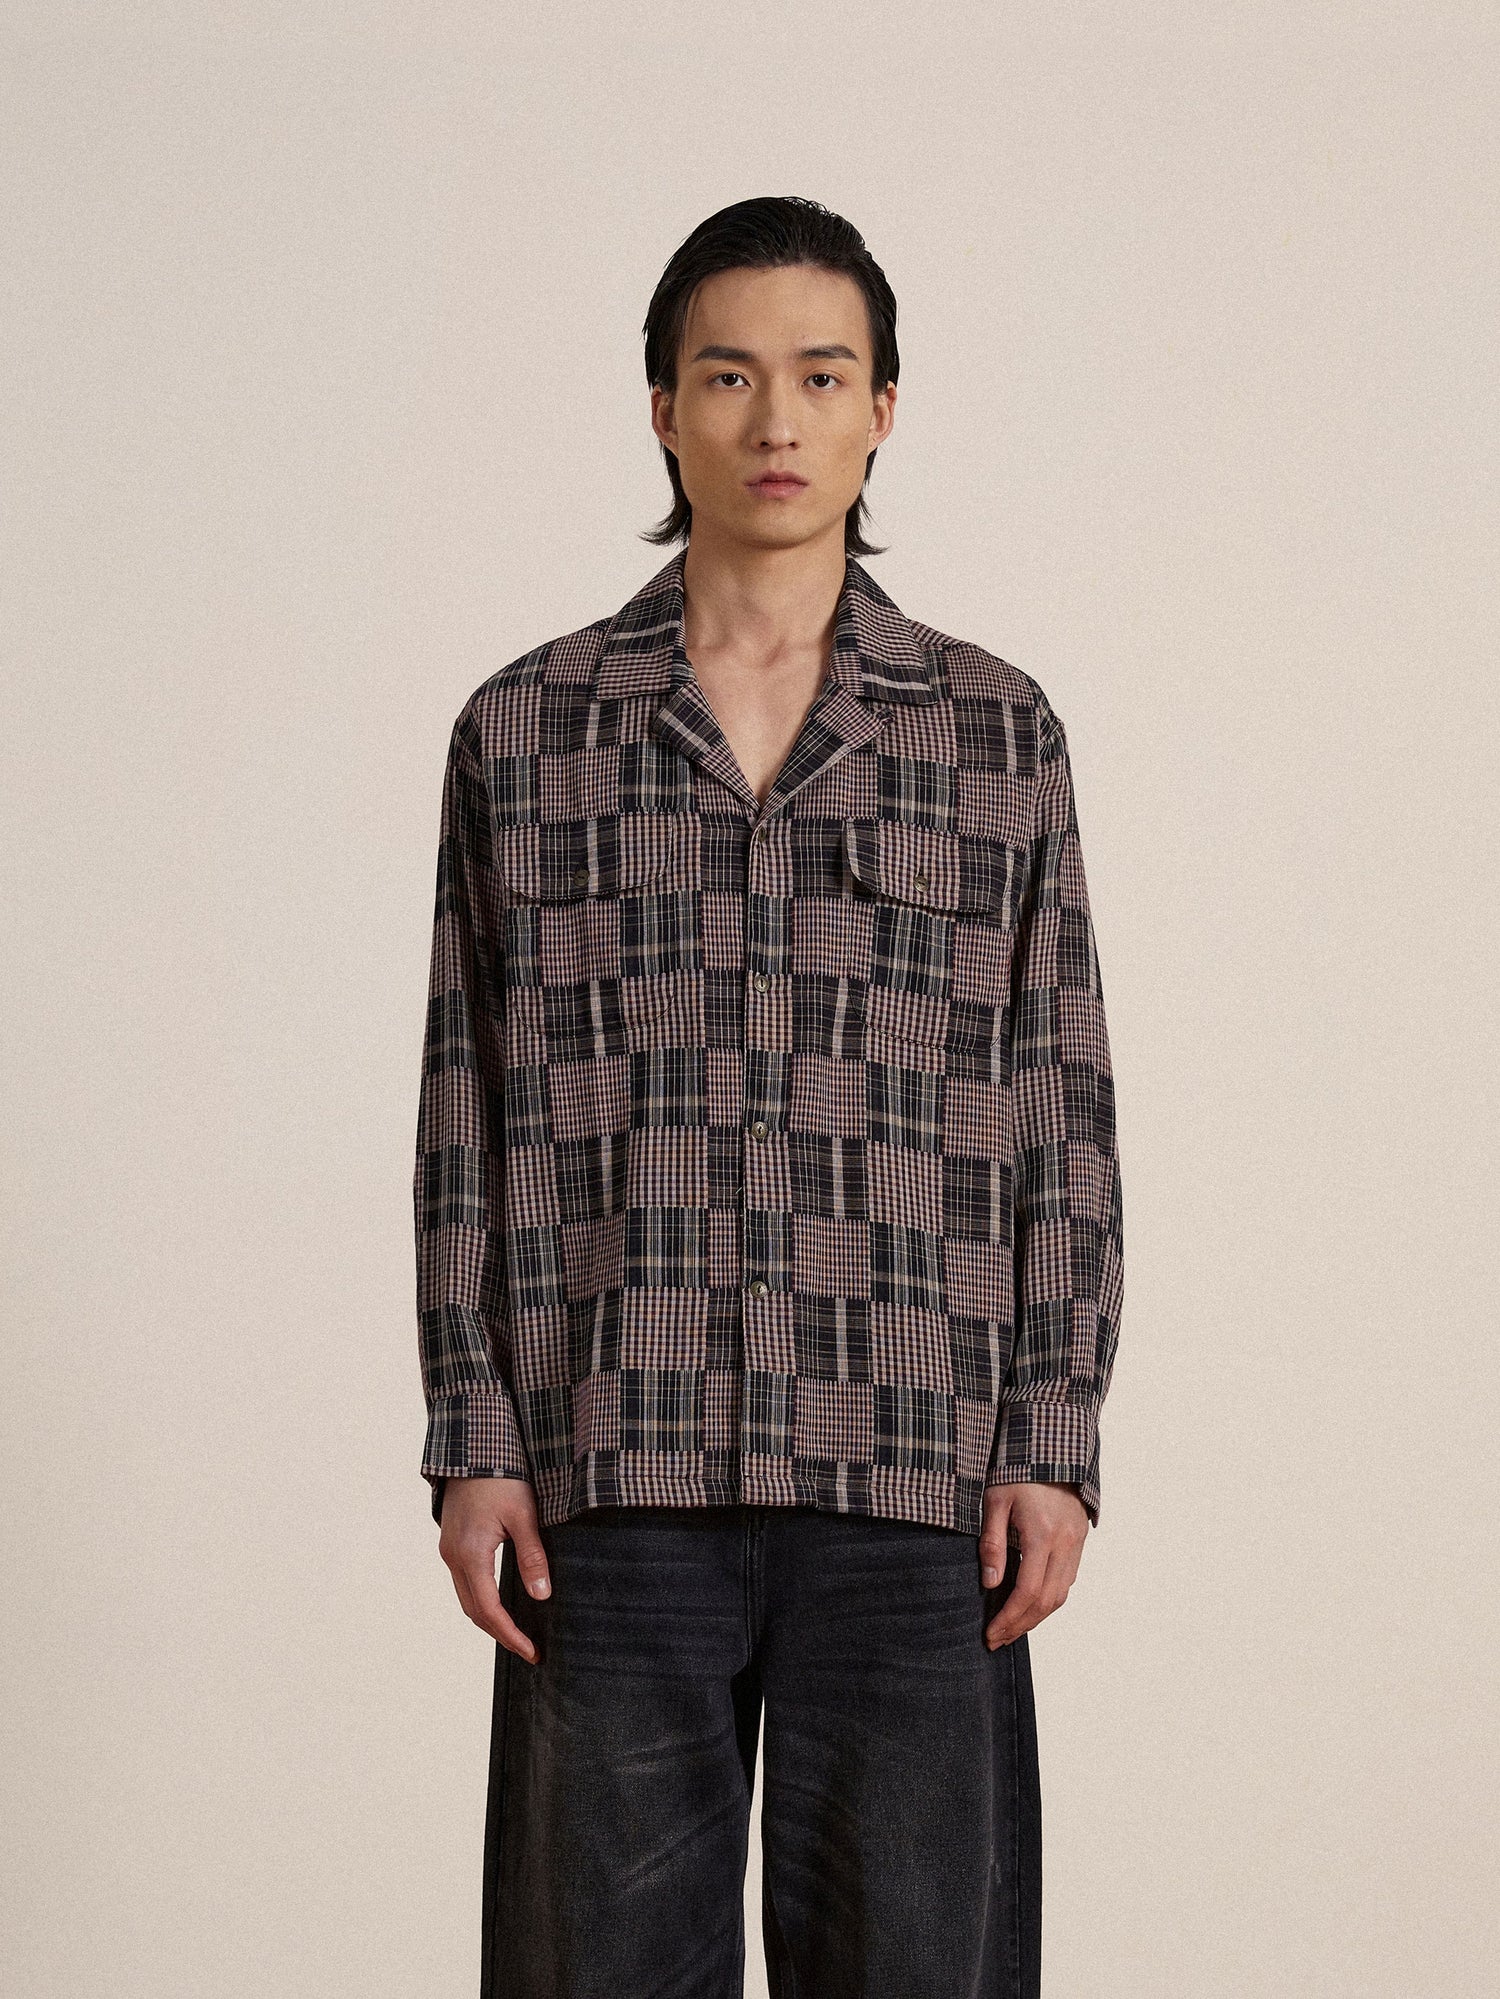 A man wearing a Found timeless silhouette Multi-Flannel LS Camp Shirt.